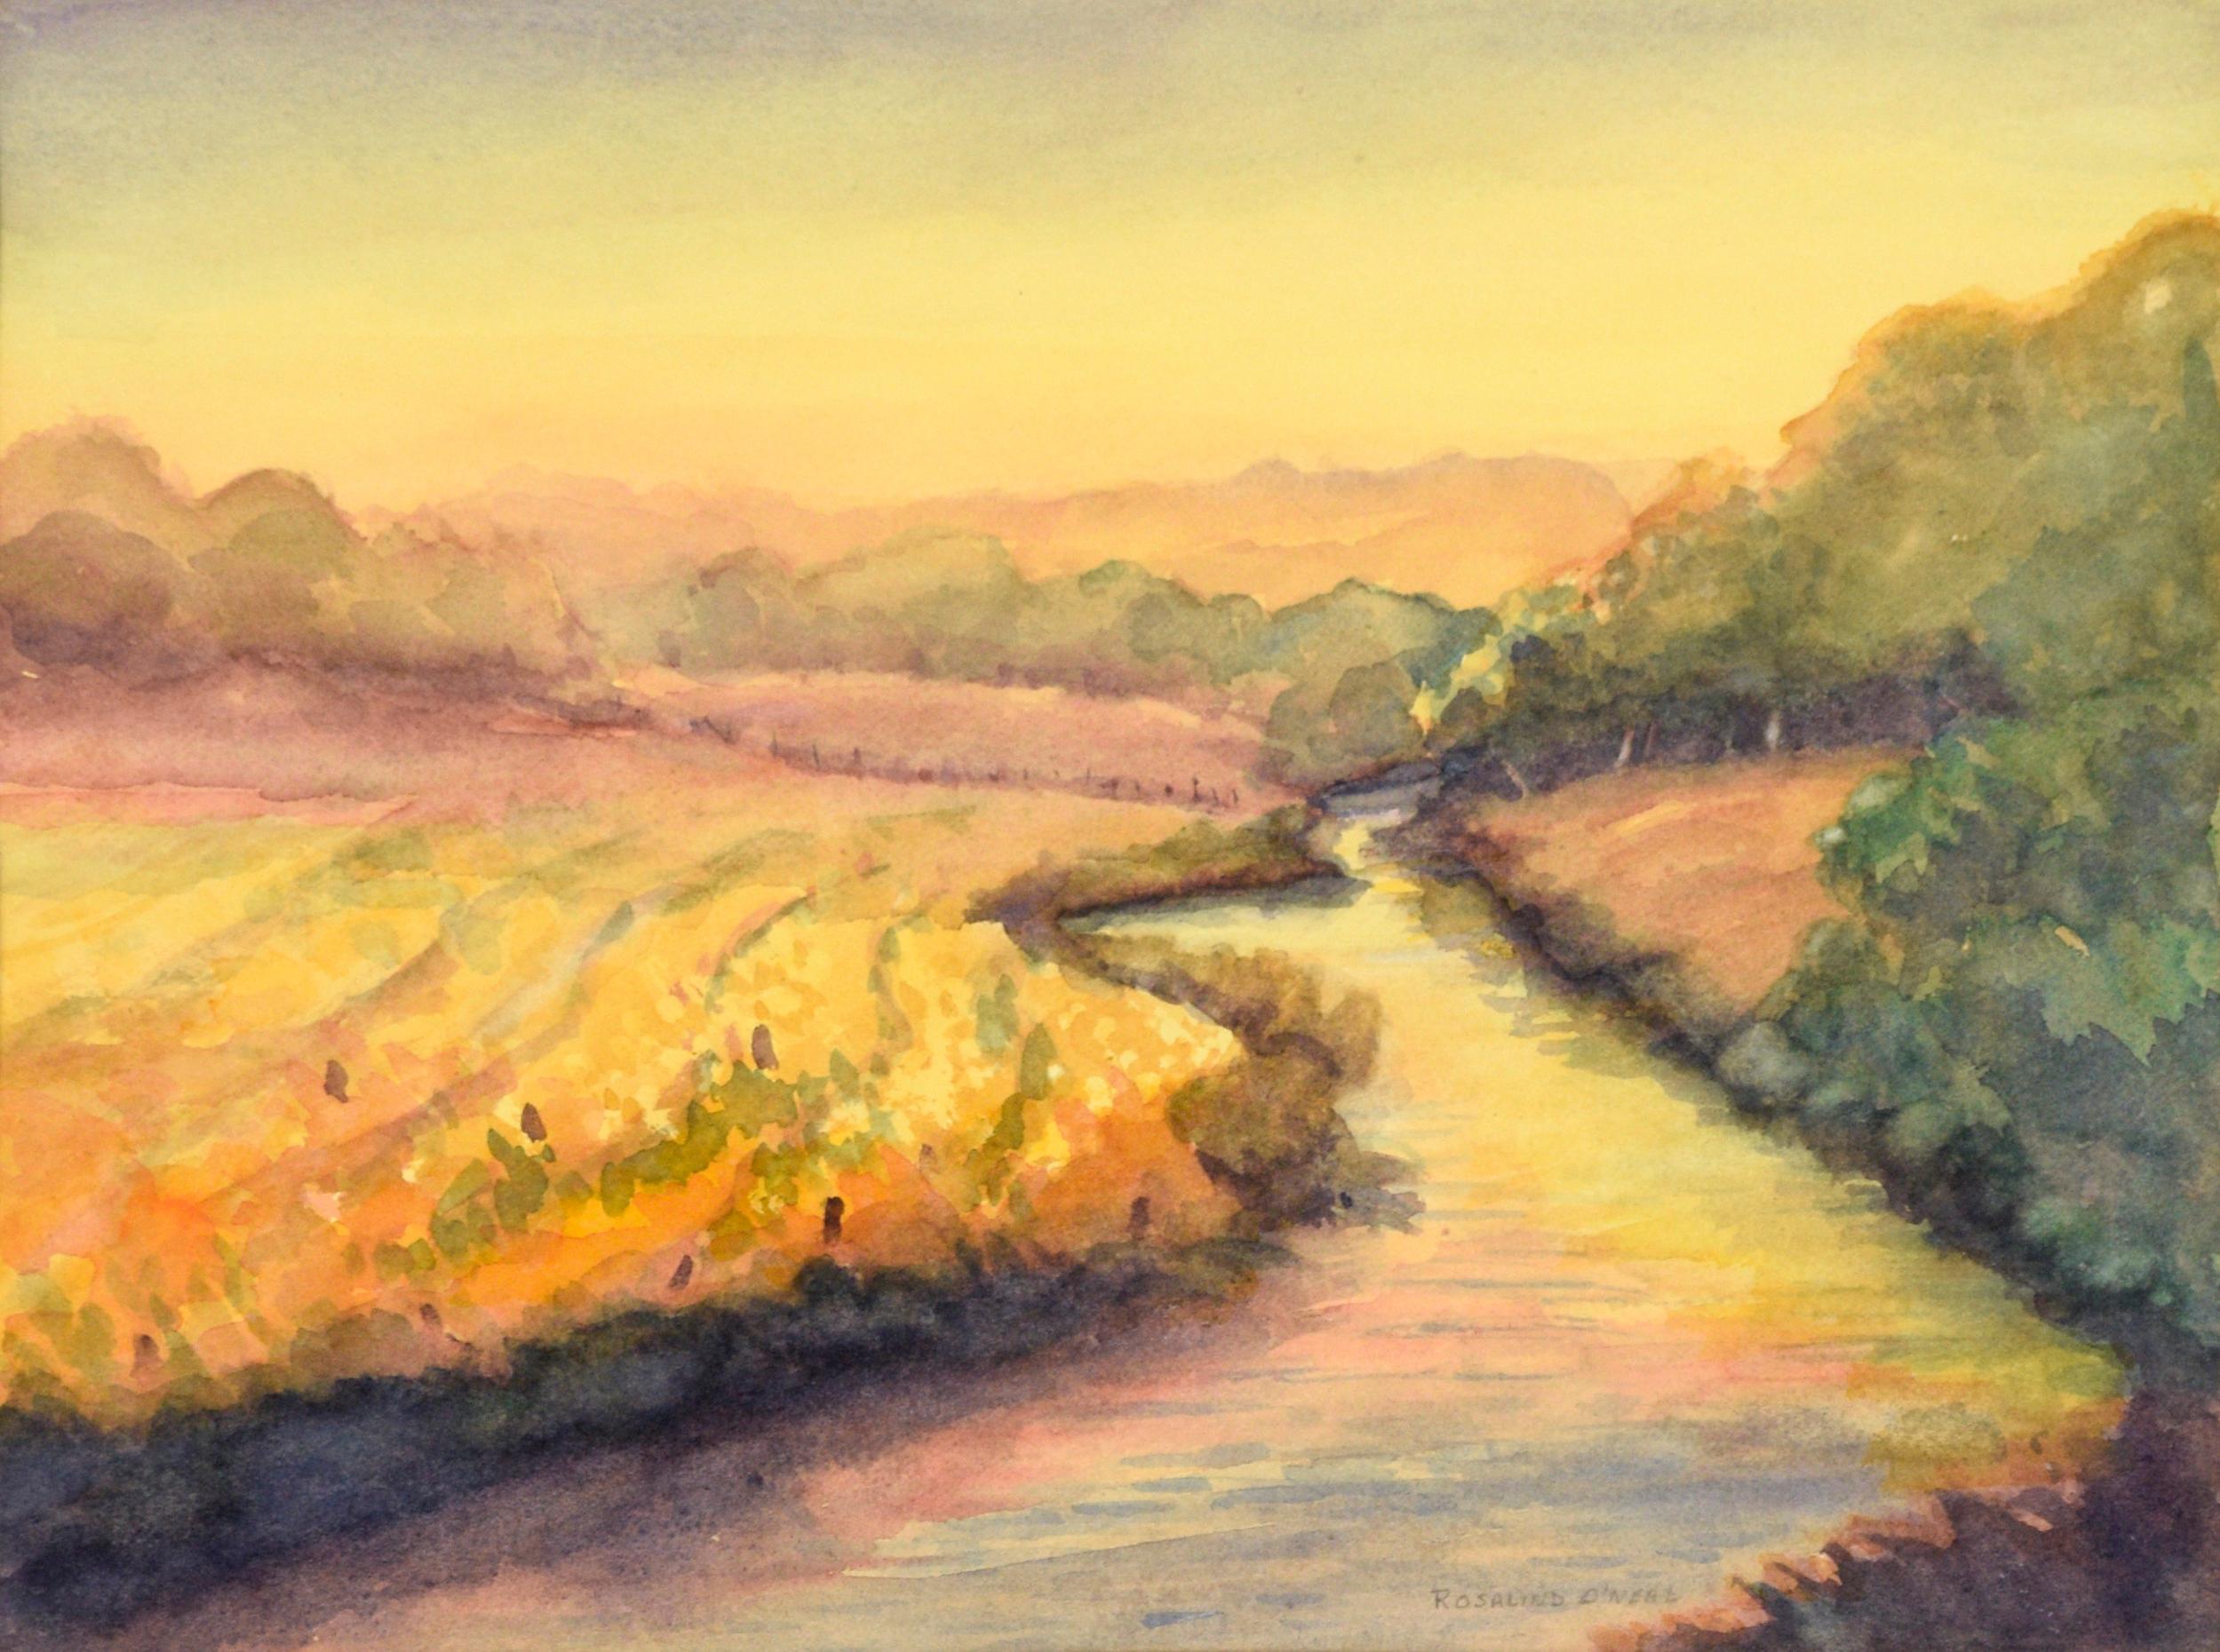 Golden Hour at the River - Watercolor Landscape on Paper - Art by Rosalind O'Neal